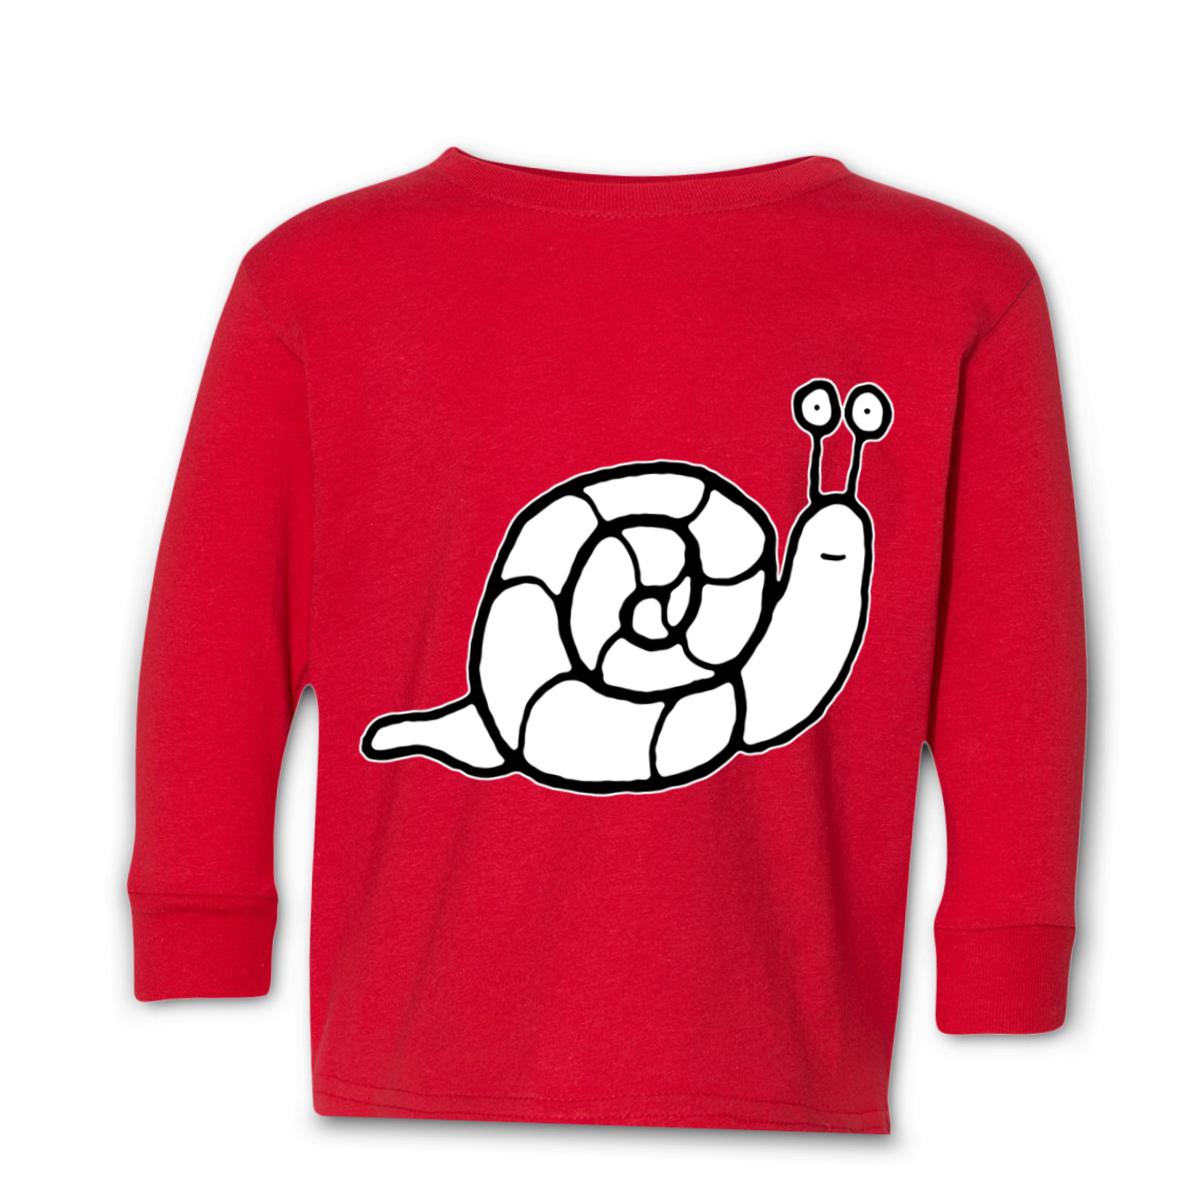 Snail Toddler Long Sleeve Tee 56T red